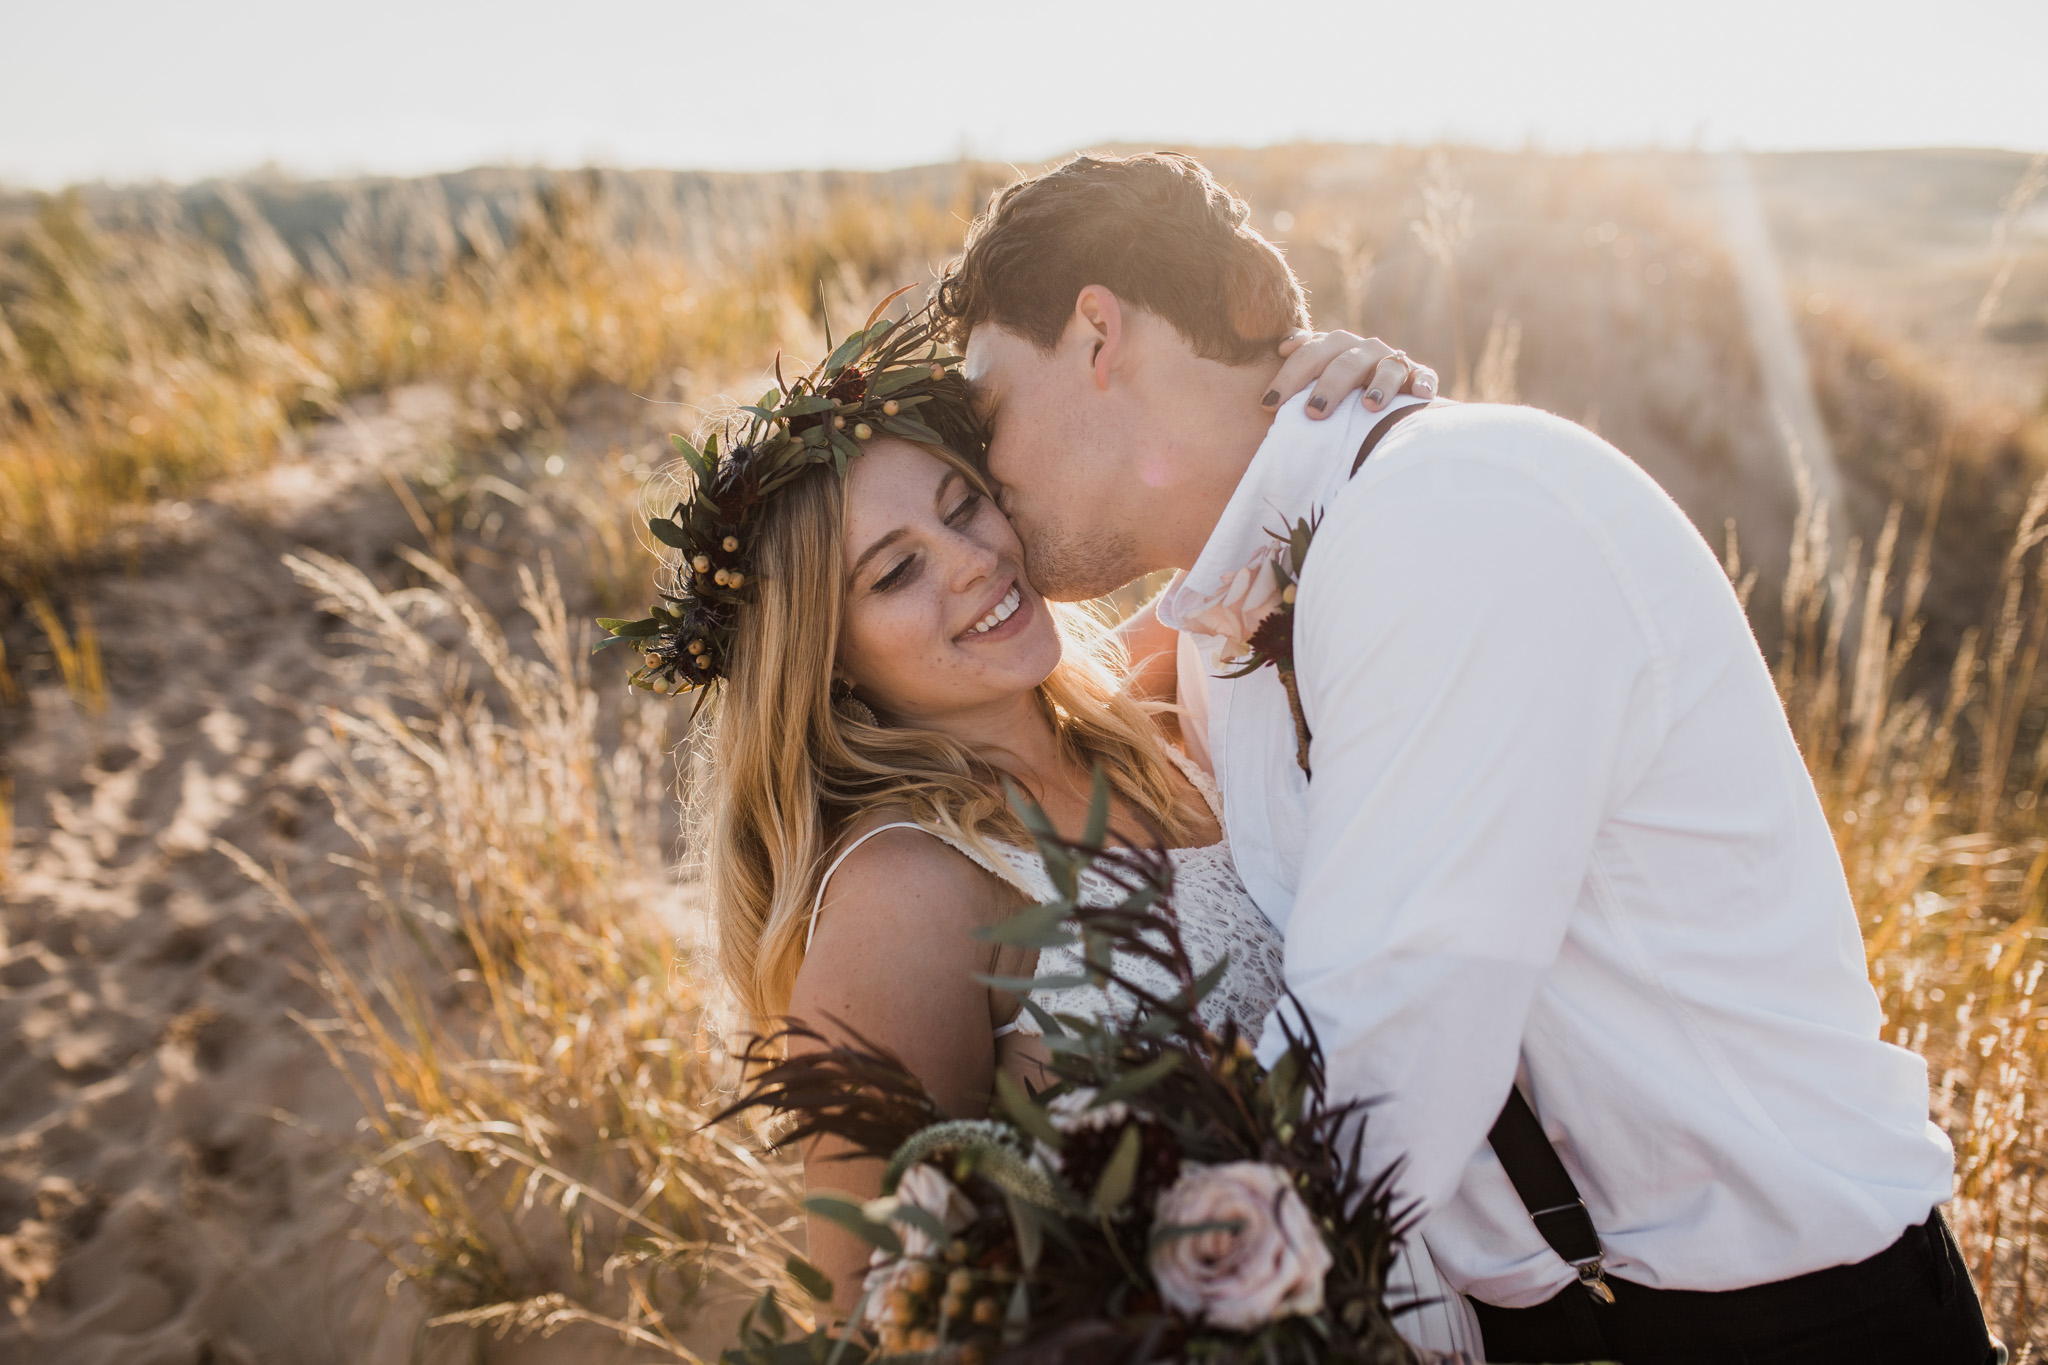 Traditional Wedding vs. Elopement: Why you should elope and how